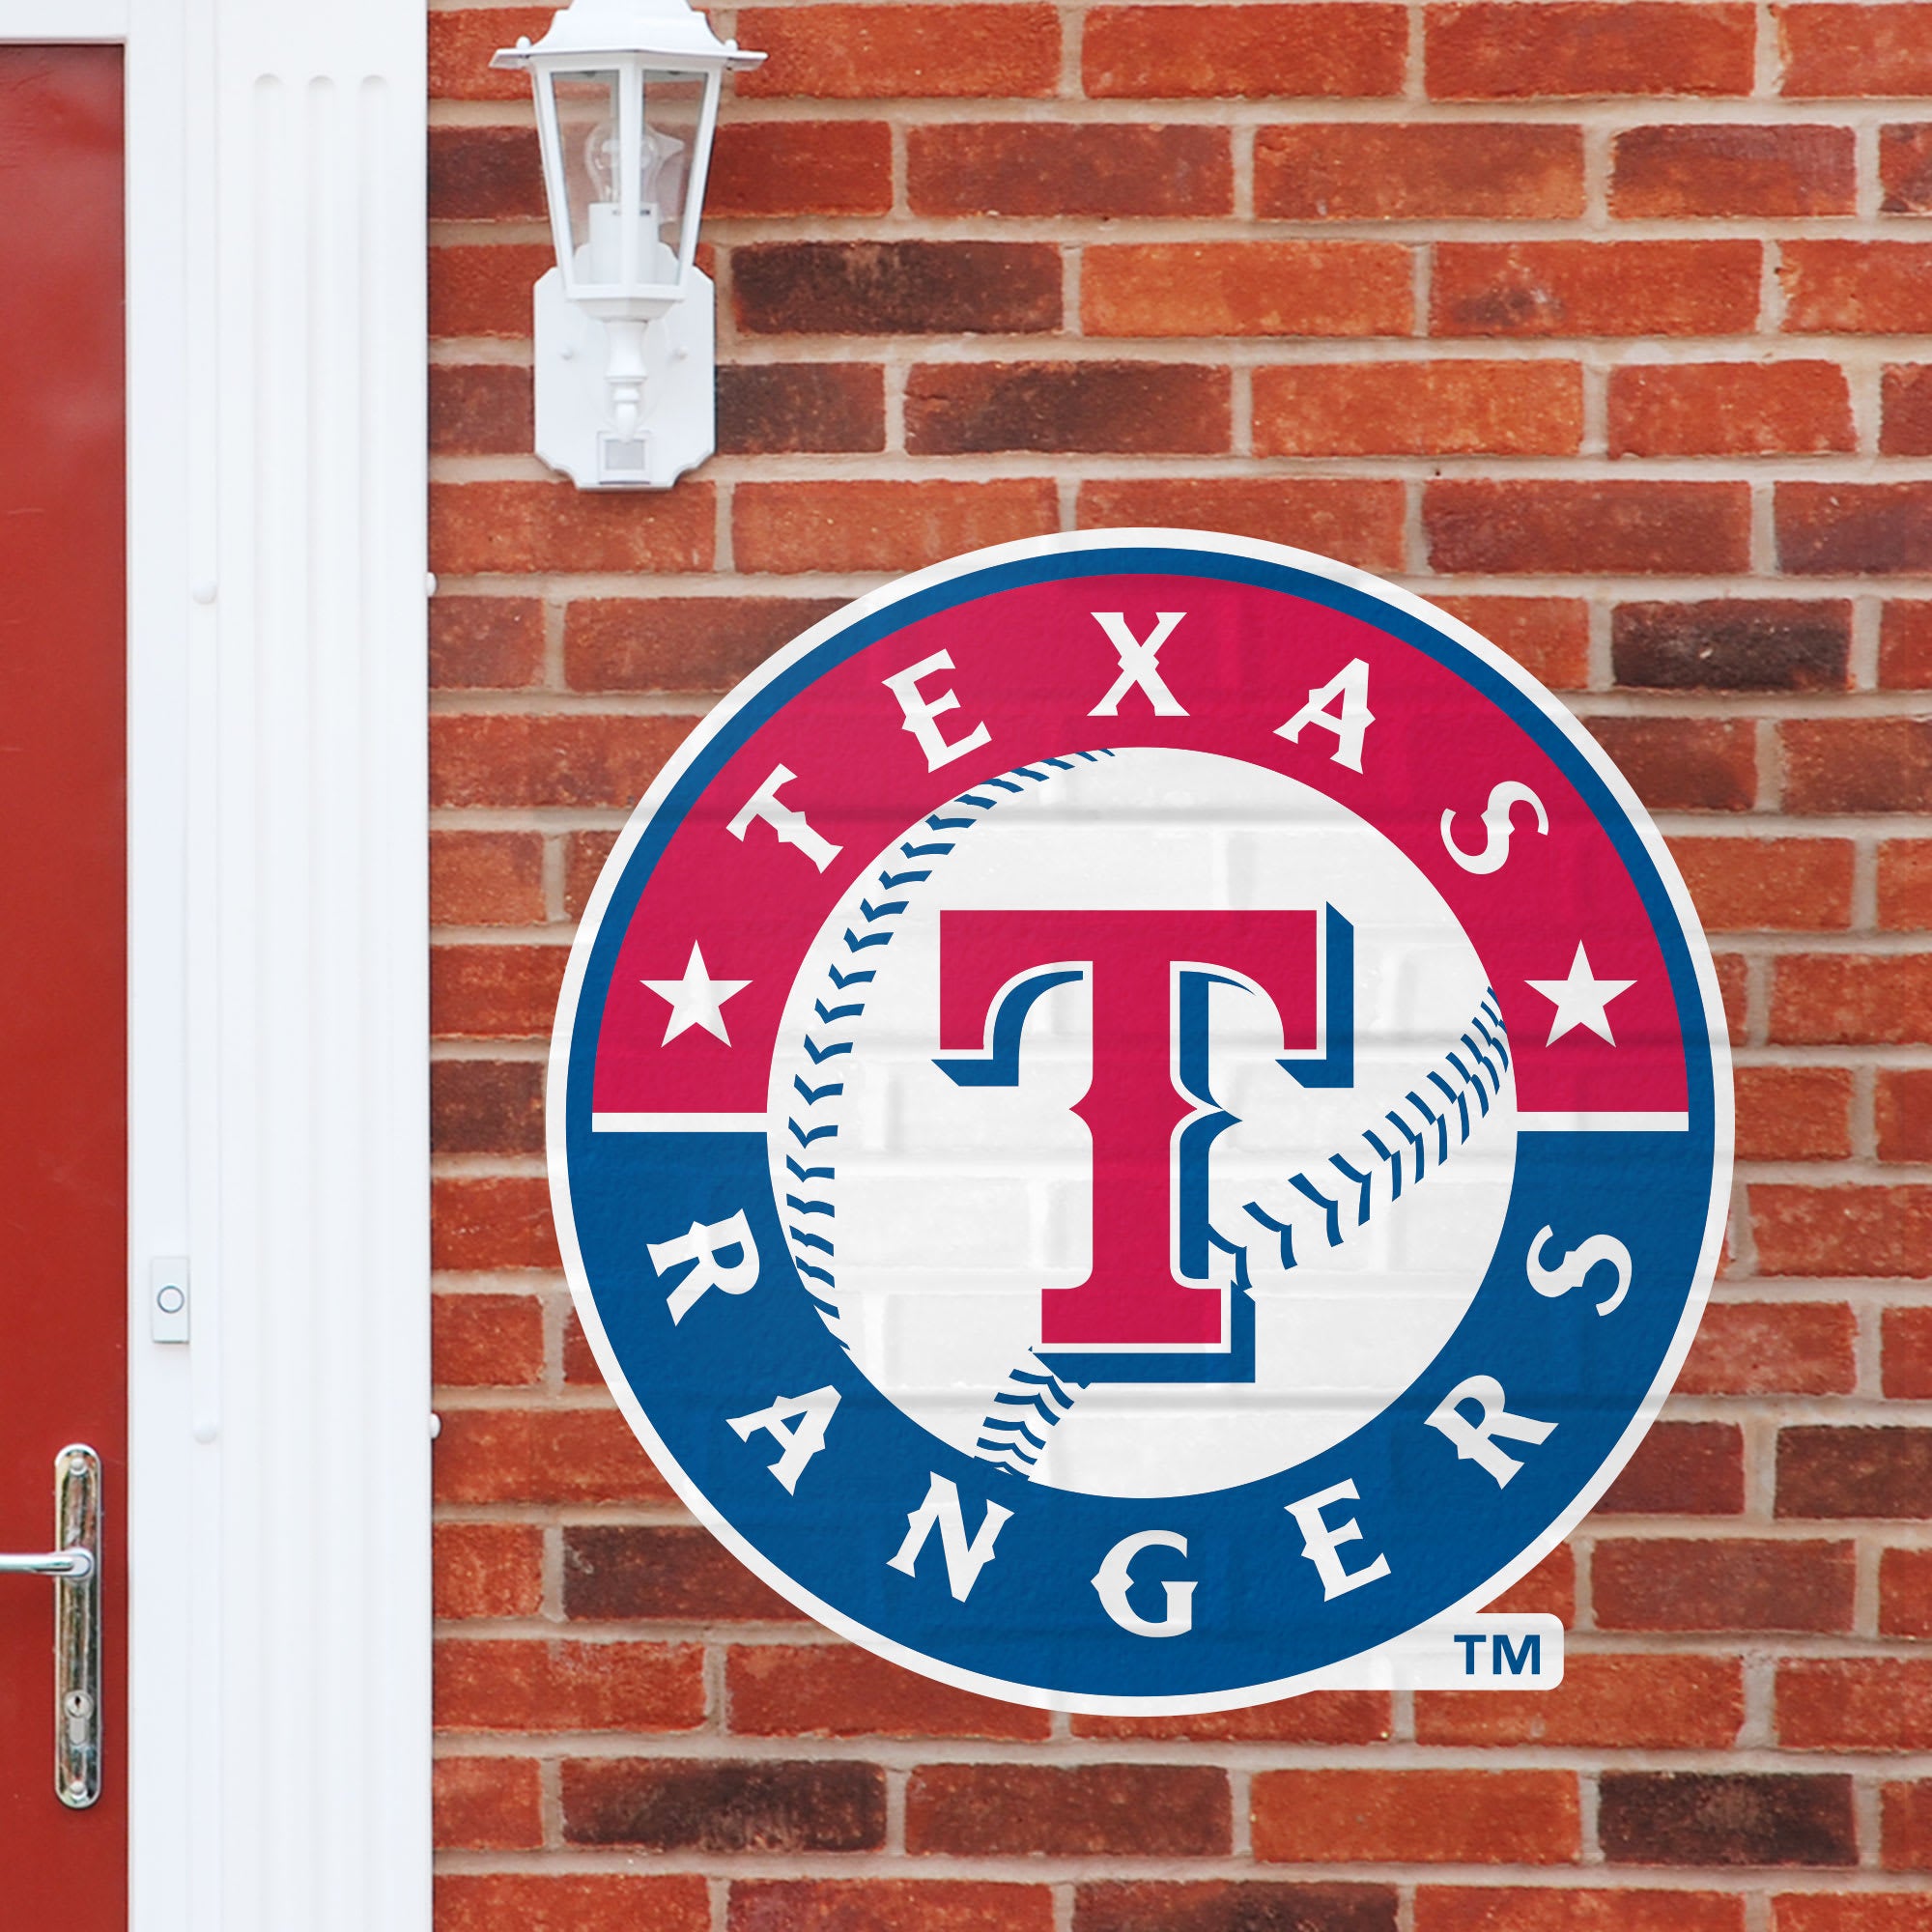 Texas Rangers: Logo - Officially Licensed MLB Outdoor Graphic Giant Logo (30"W x 30"H) by Fathead | Wood/Aluminum